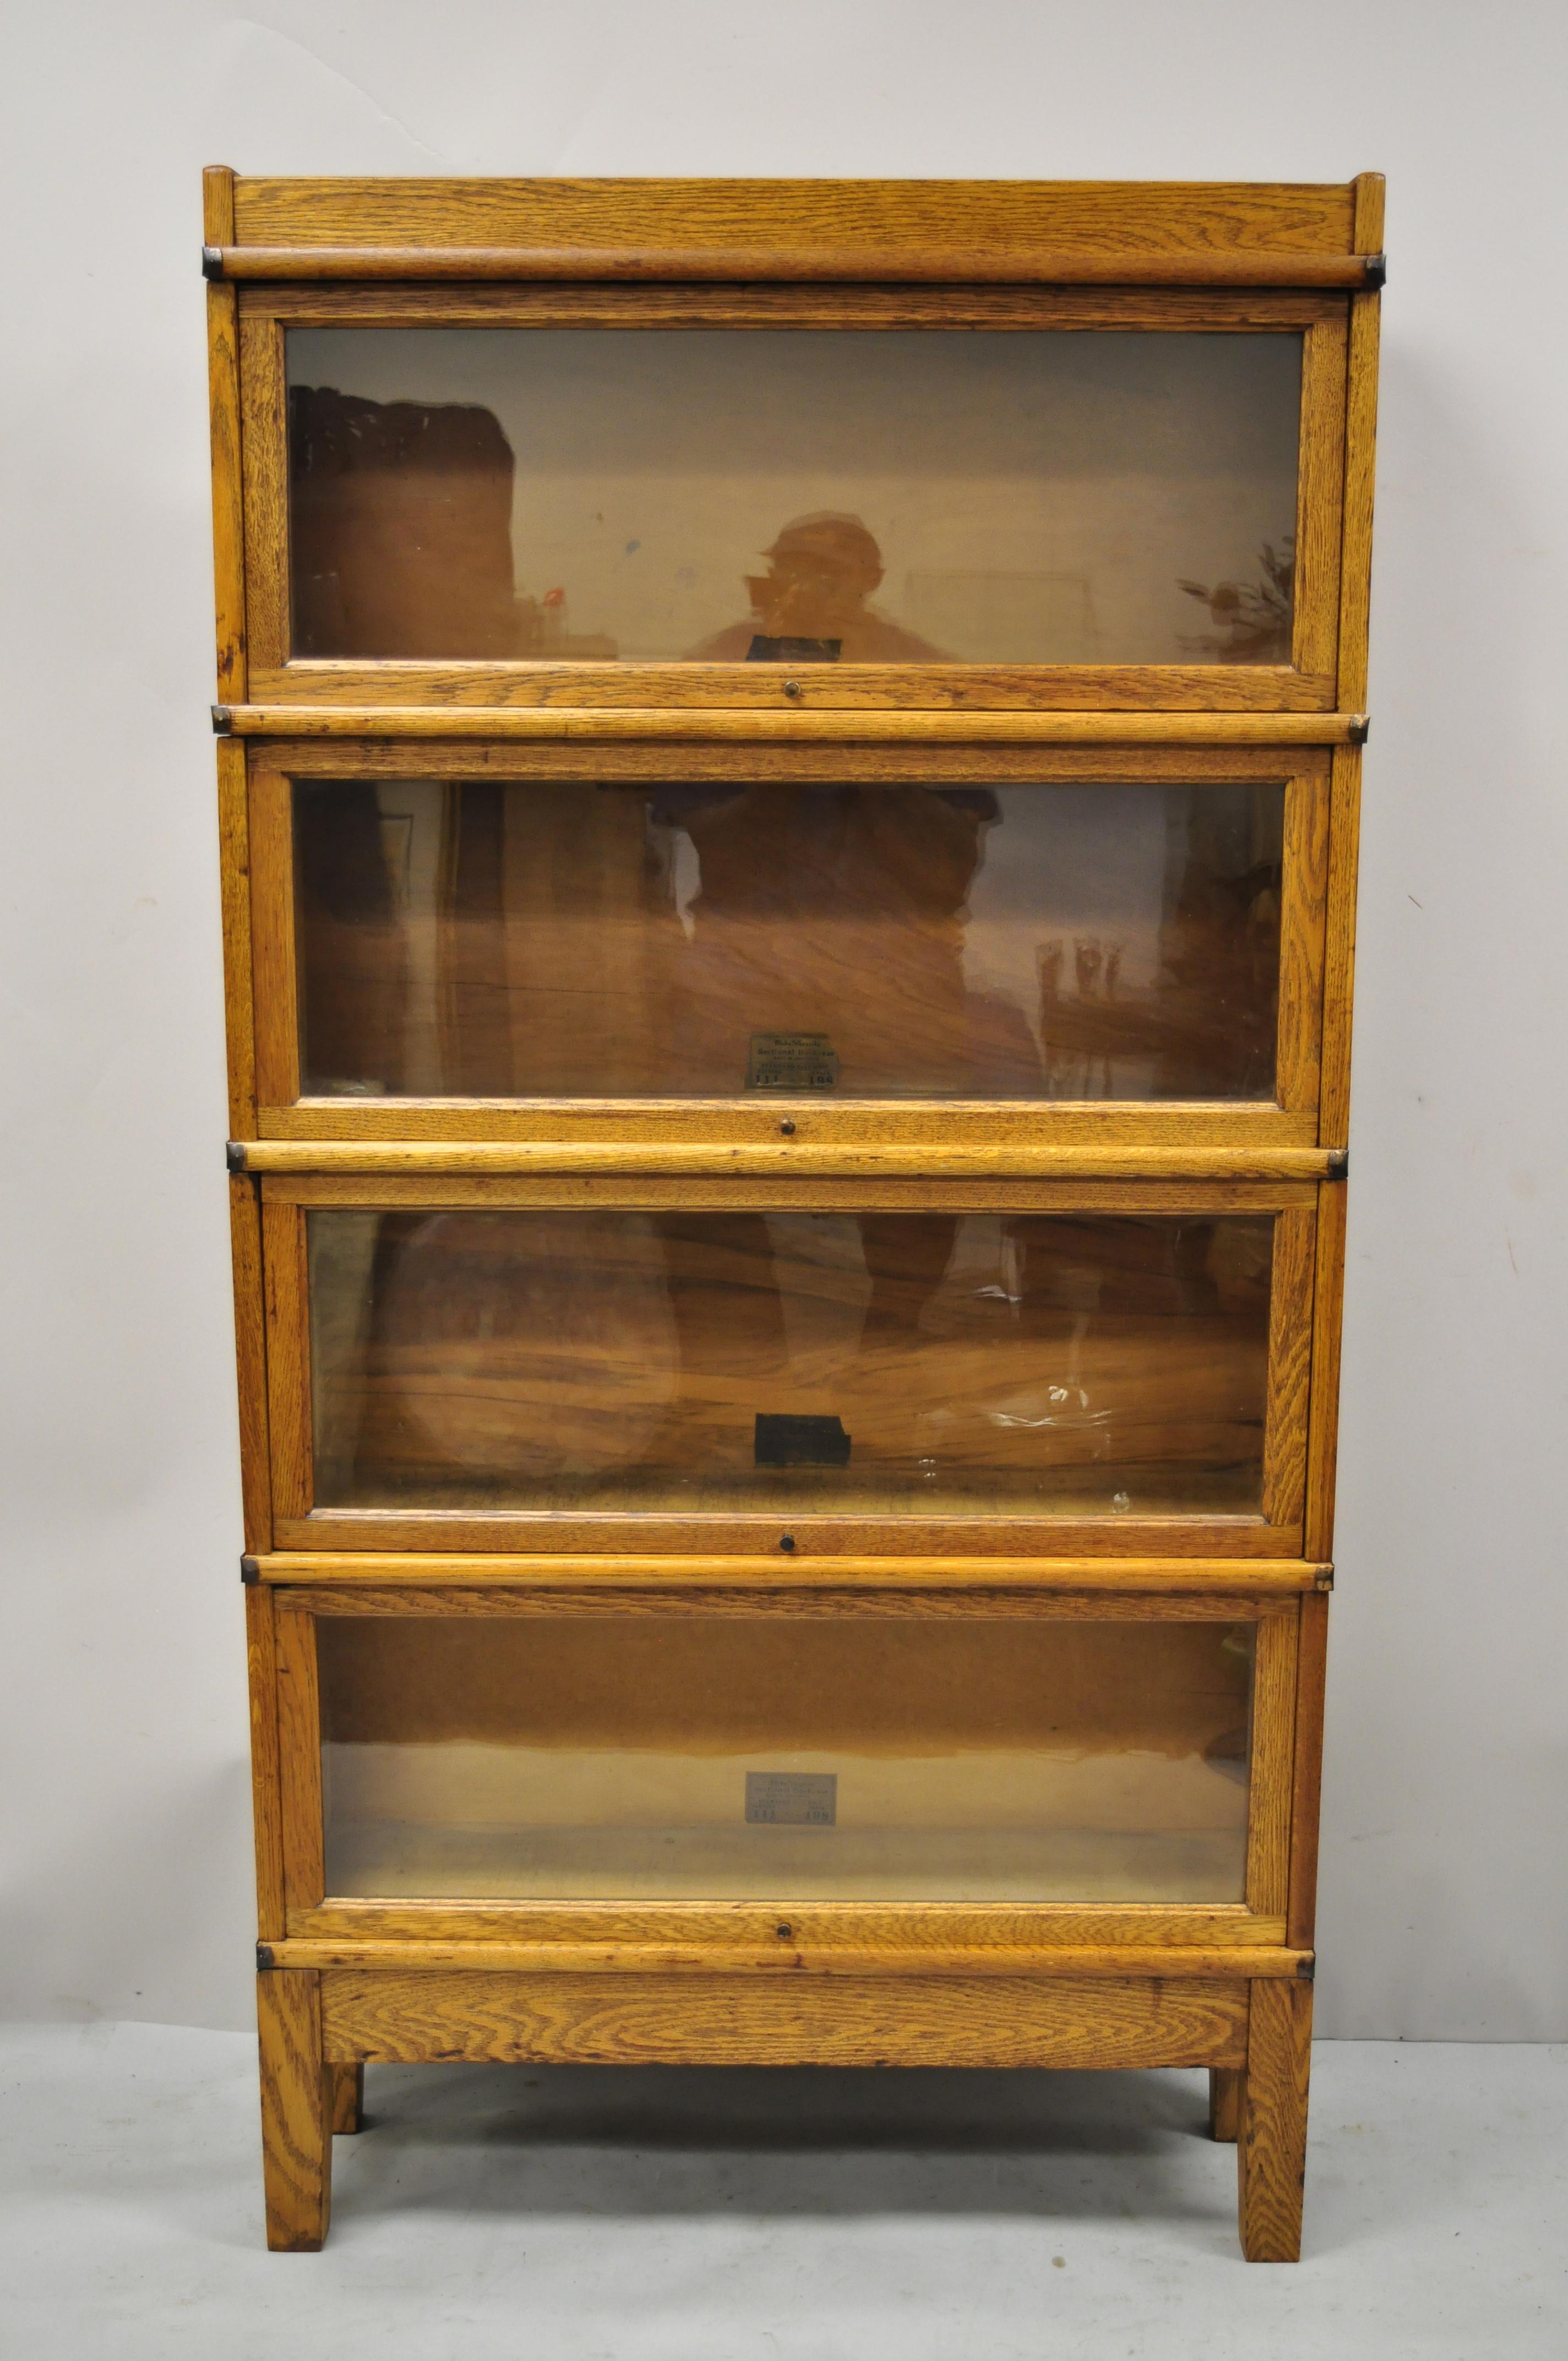 Antique Globe Wernicke golden oak 4 section stacking Barrister lawyers bookcase. Item features (4) sliding glass stacking bookcase sections, original base and top, metal side bands, original labels, very nice antique set, quality craftsmanship,